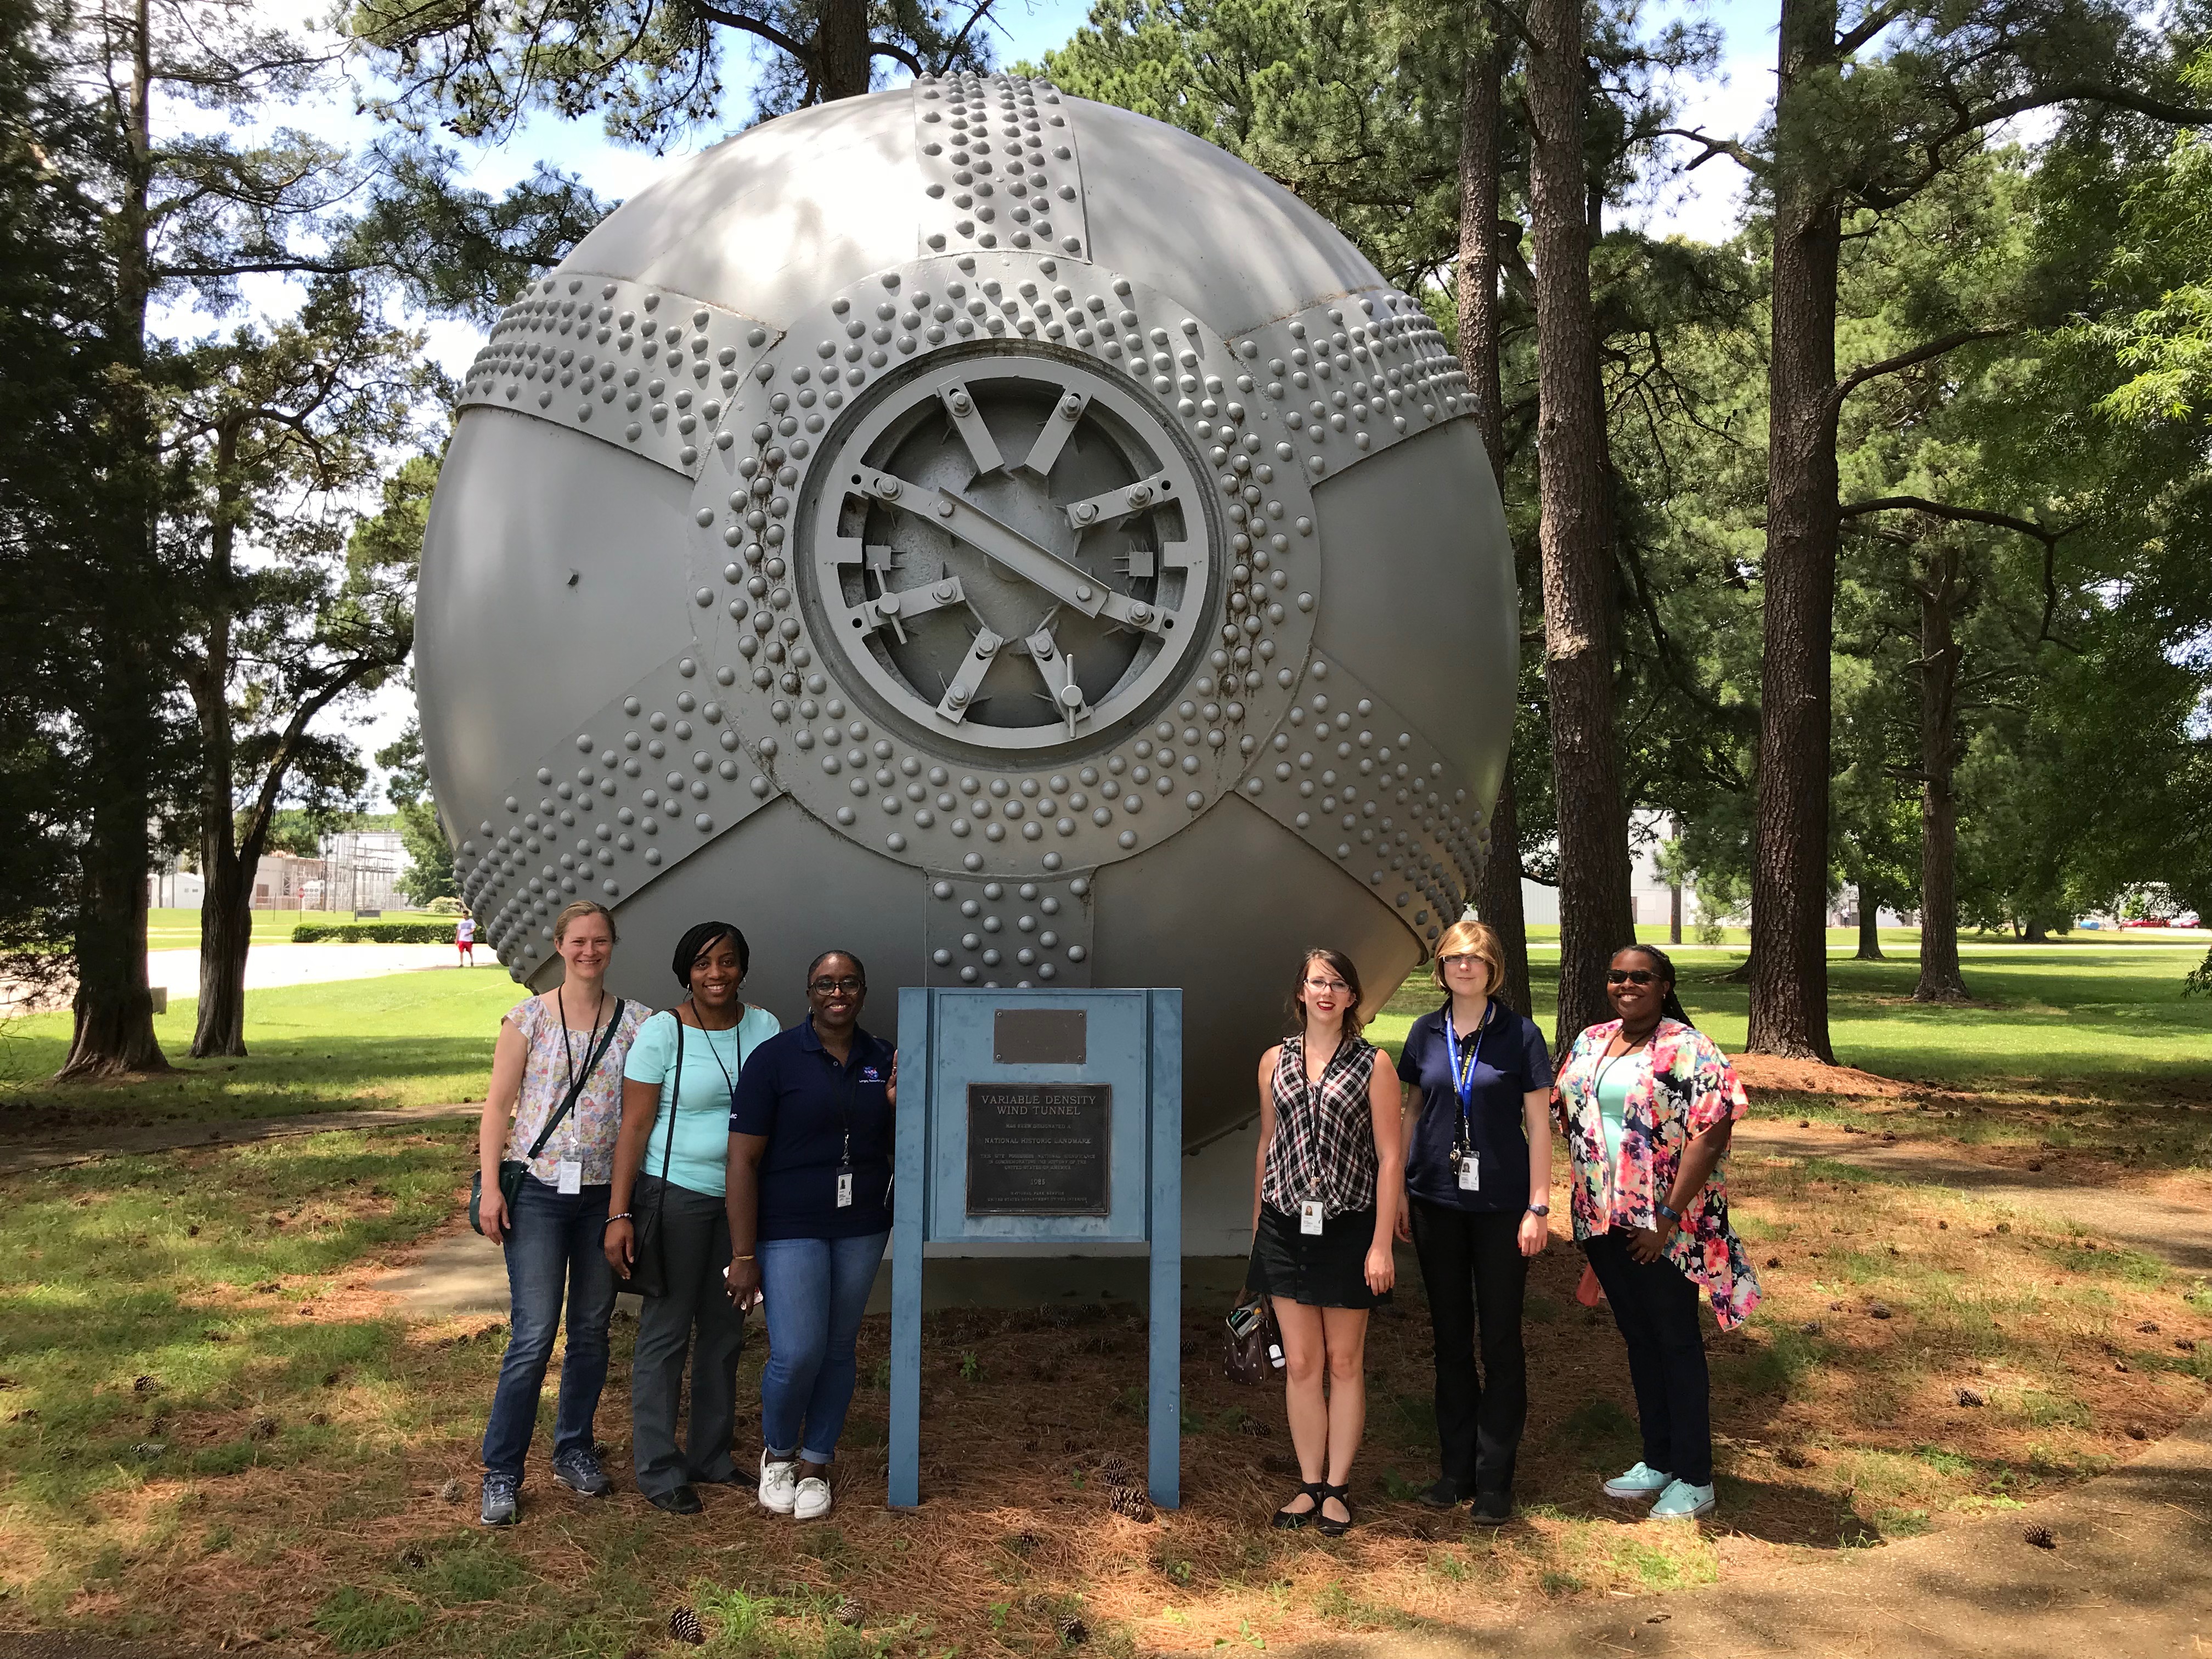 Six female teachers standing in front of a large metal ball - a wind tunnel - outside on a sunny day in a pine woodland.